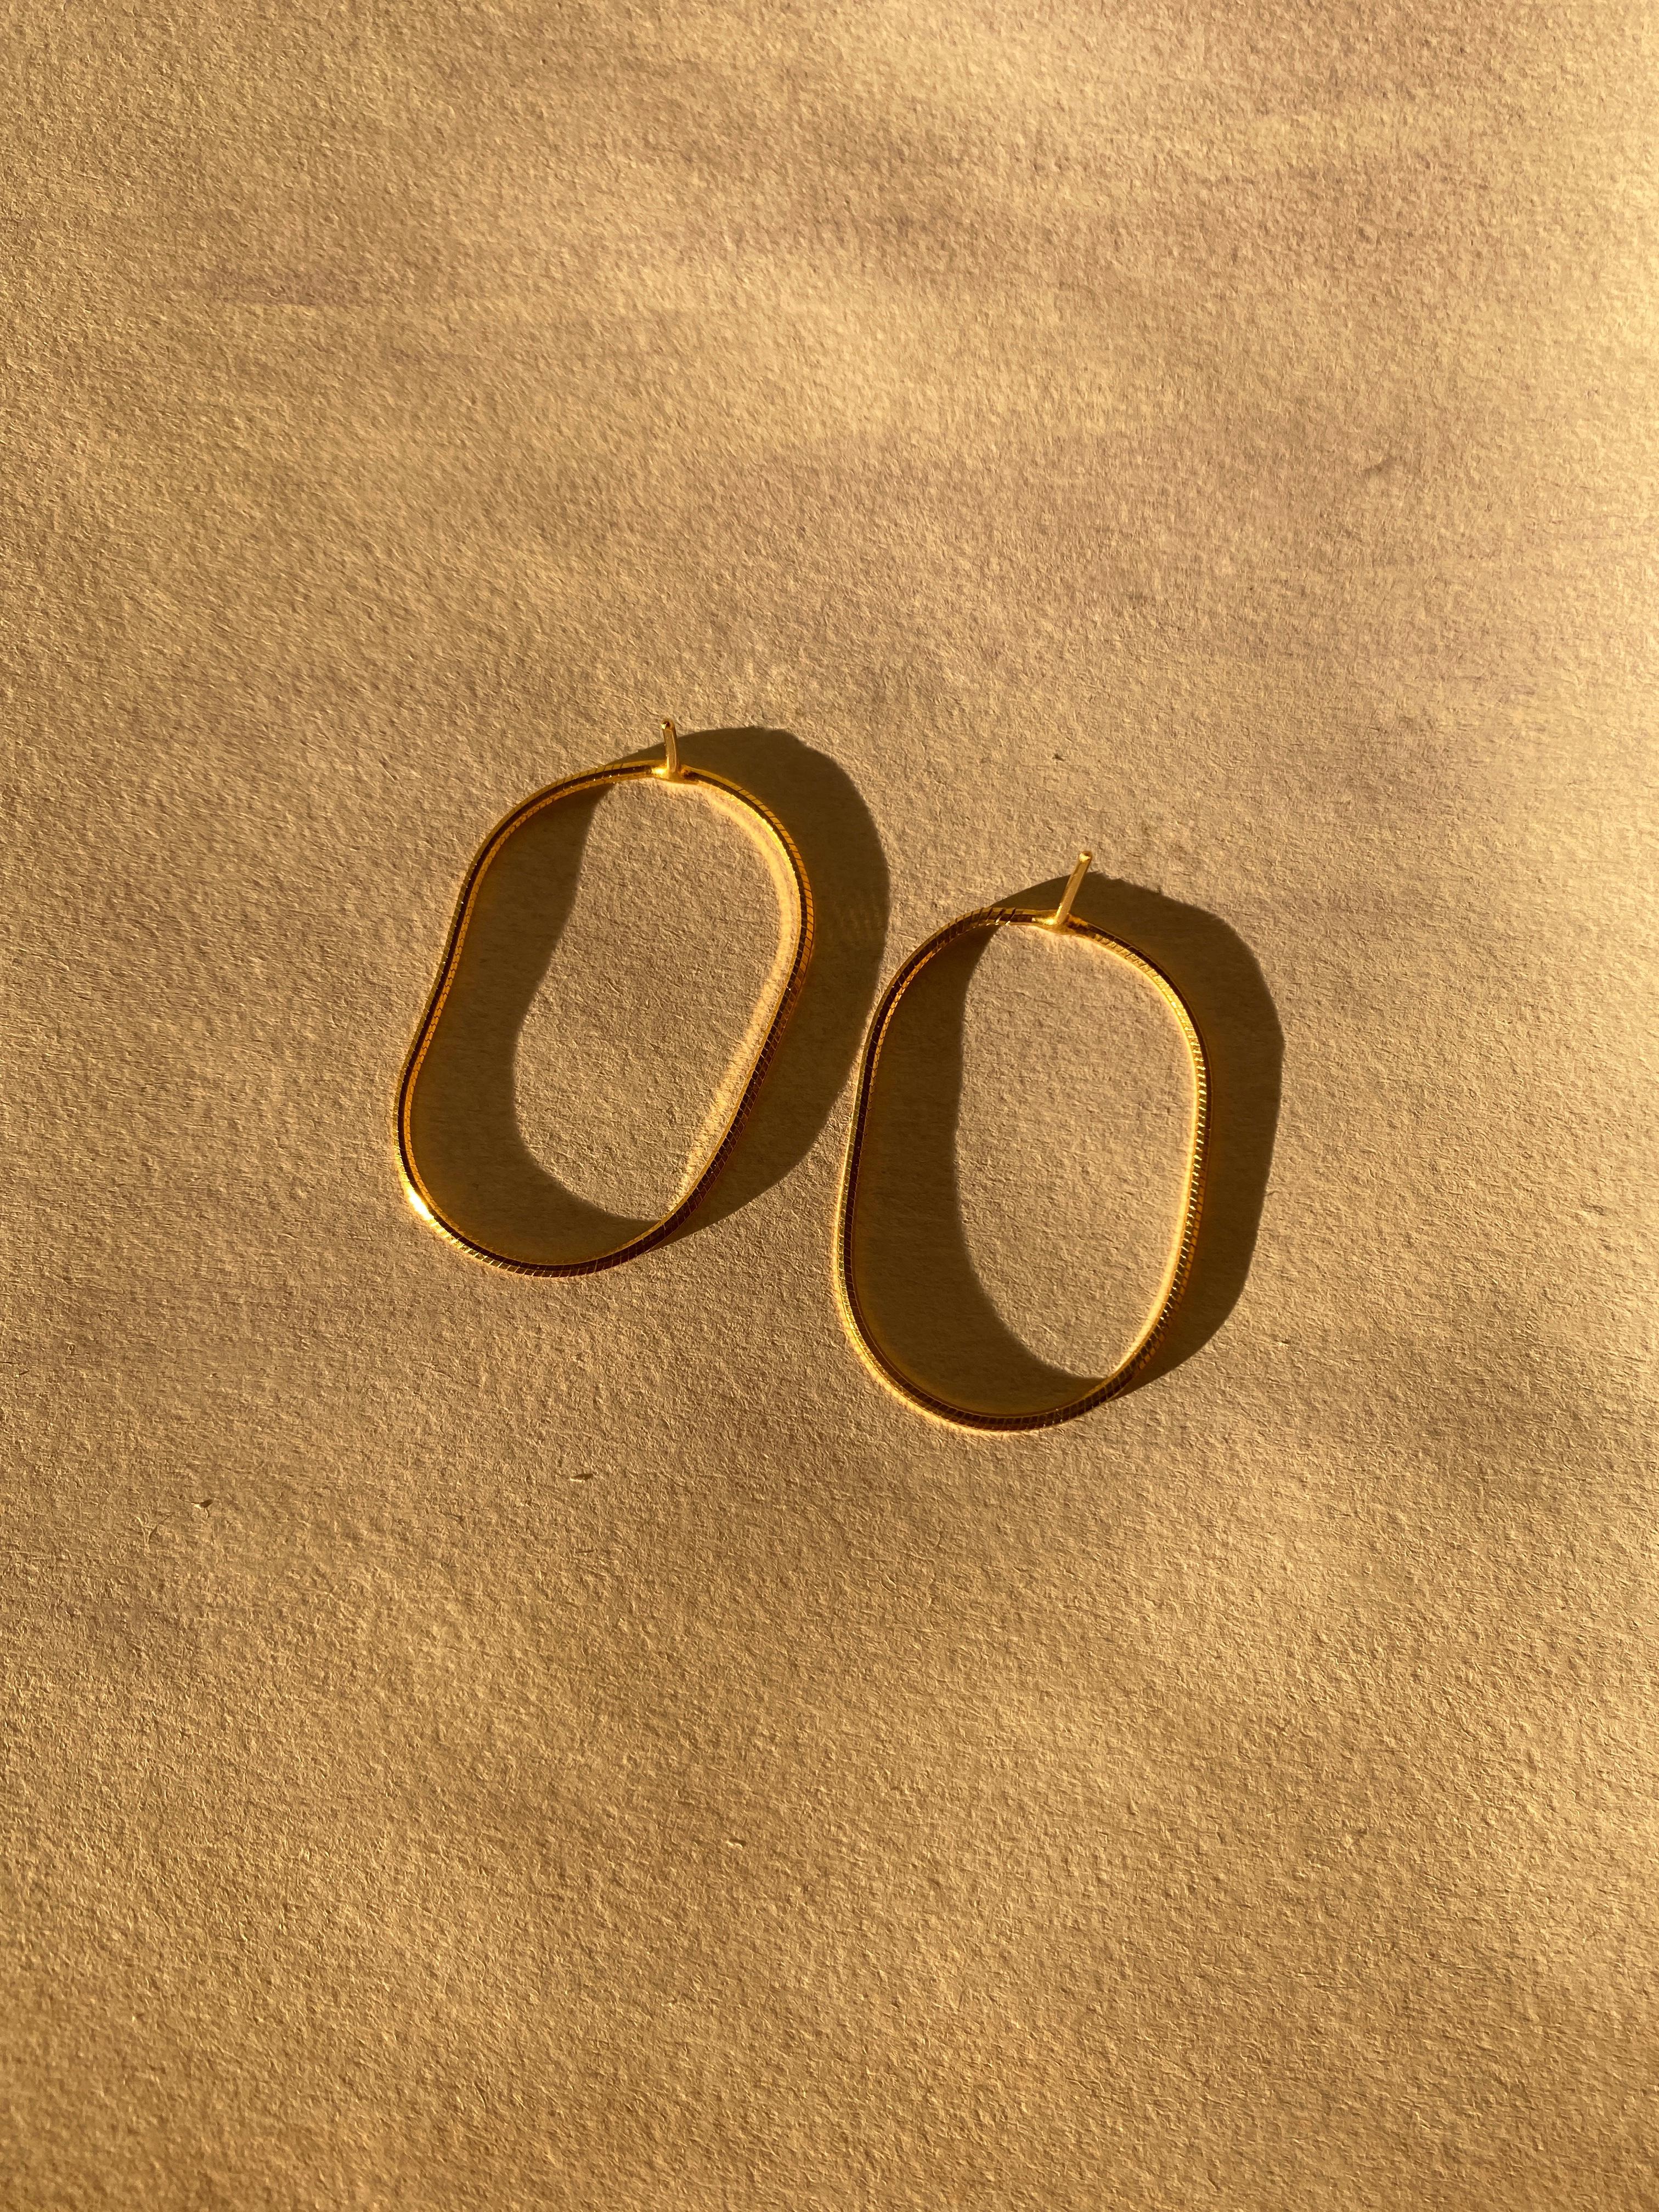 Halo earrings 

These 18 K- gold plated silver earrings are available in 4 lengths (see in pictures). The price listed is for the small size. They offer a minimal and modern look. They also look good styled with different sizes and worn in multiple